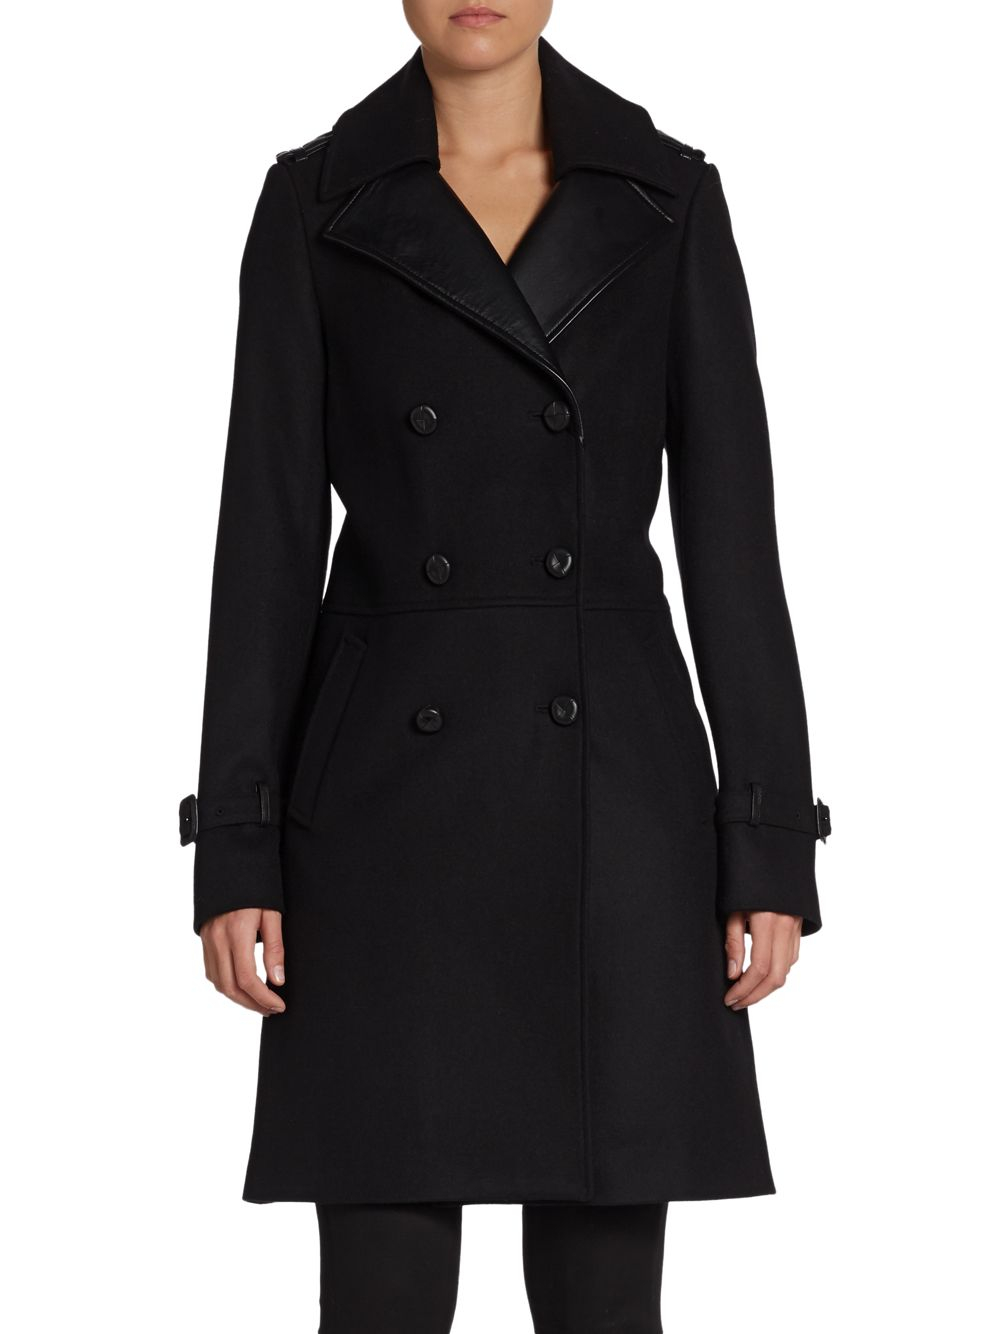 Lyst - Mackage Double-Breasted Leather-Accented Coachman Coat in Black